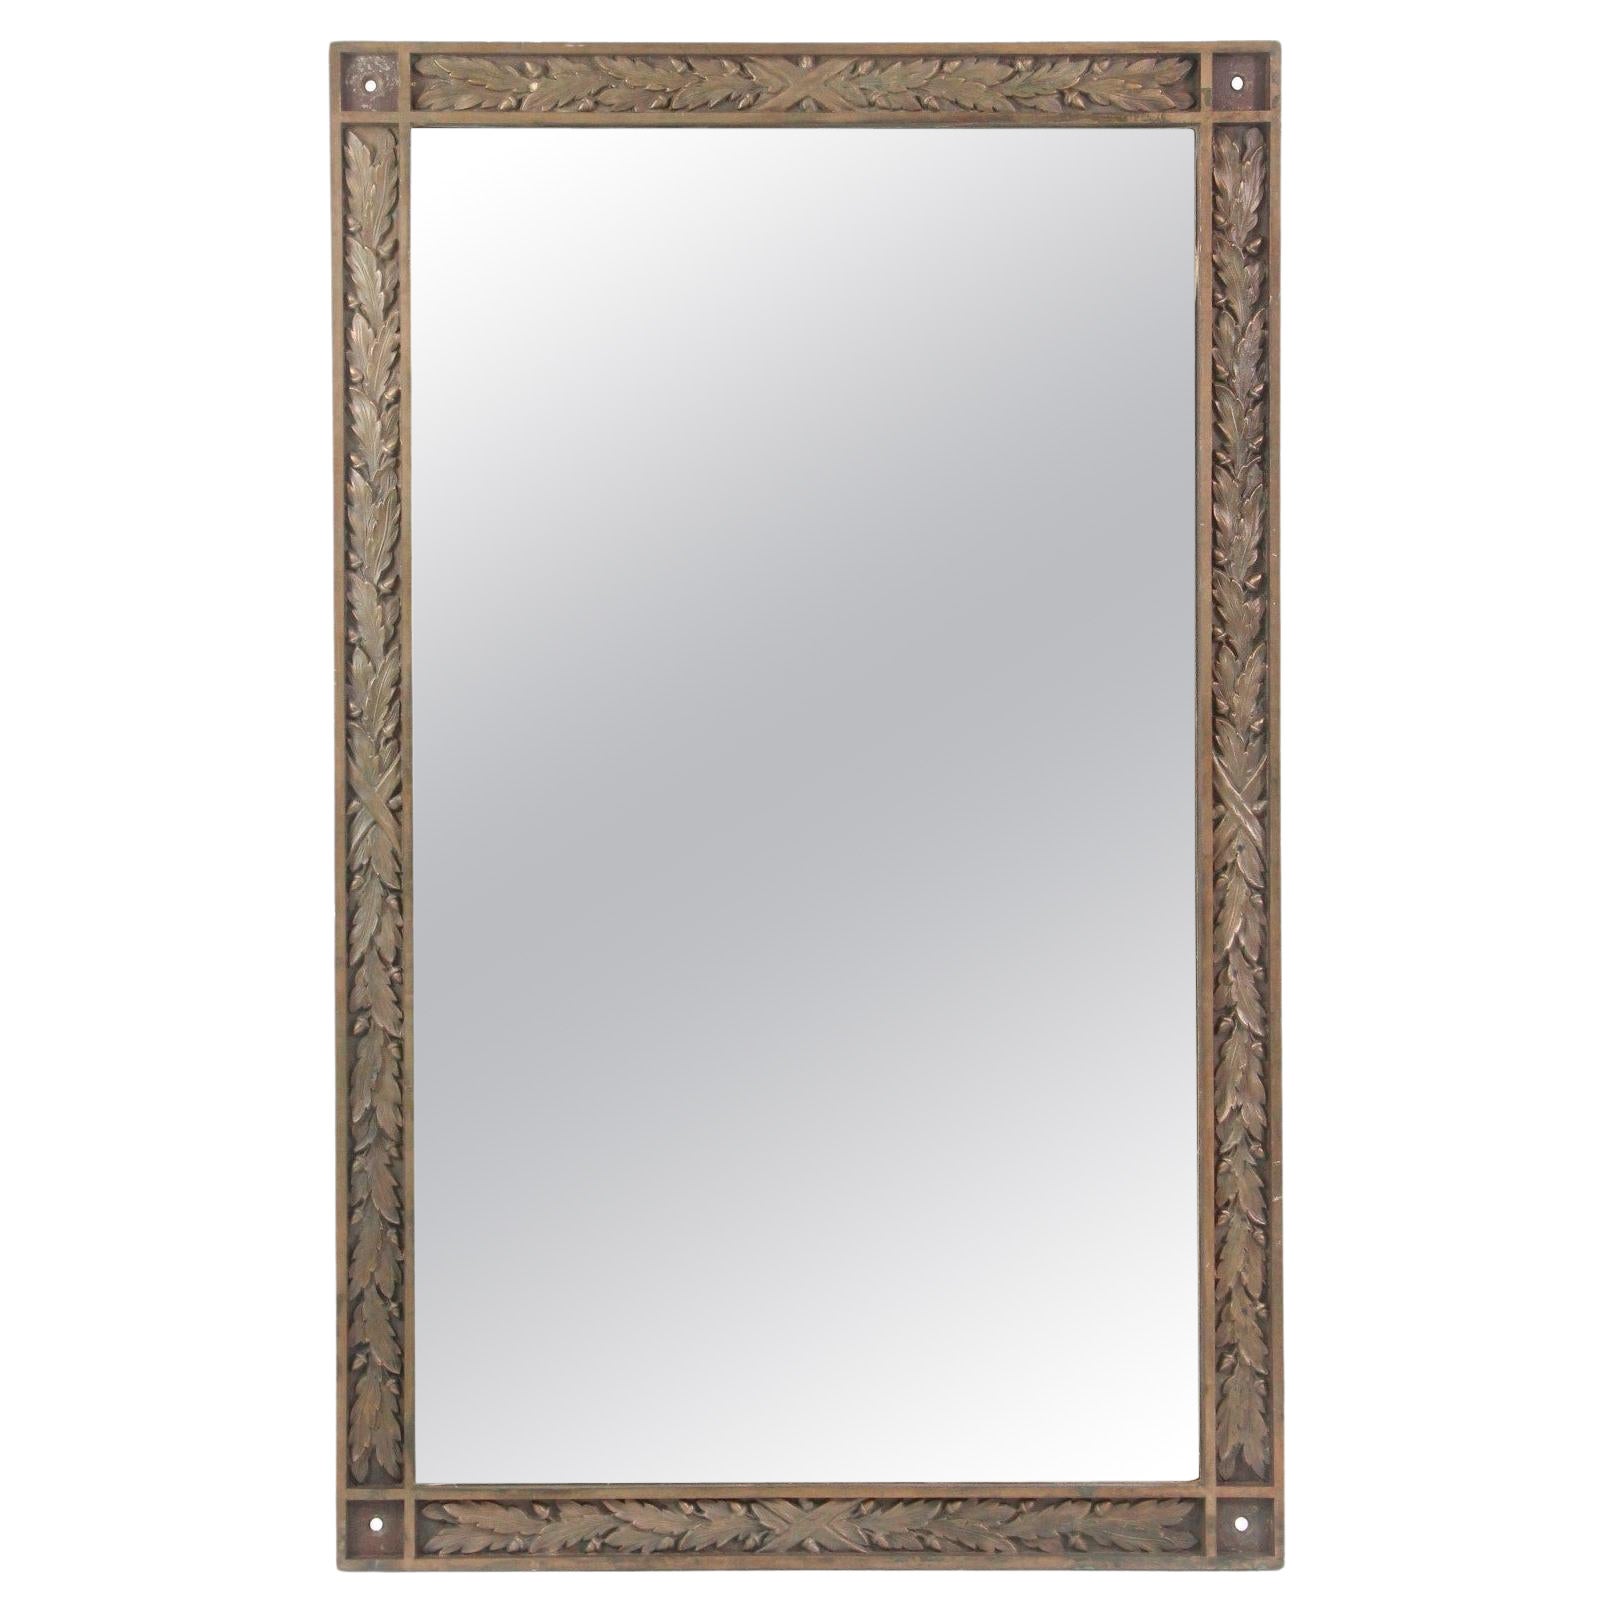 Bronze Framed Distressed Mirror Foliage Pattern  4 ft Tall For Sale